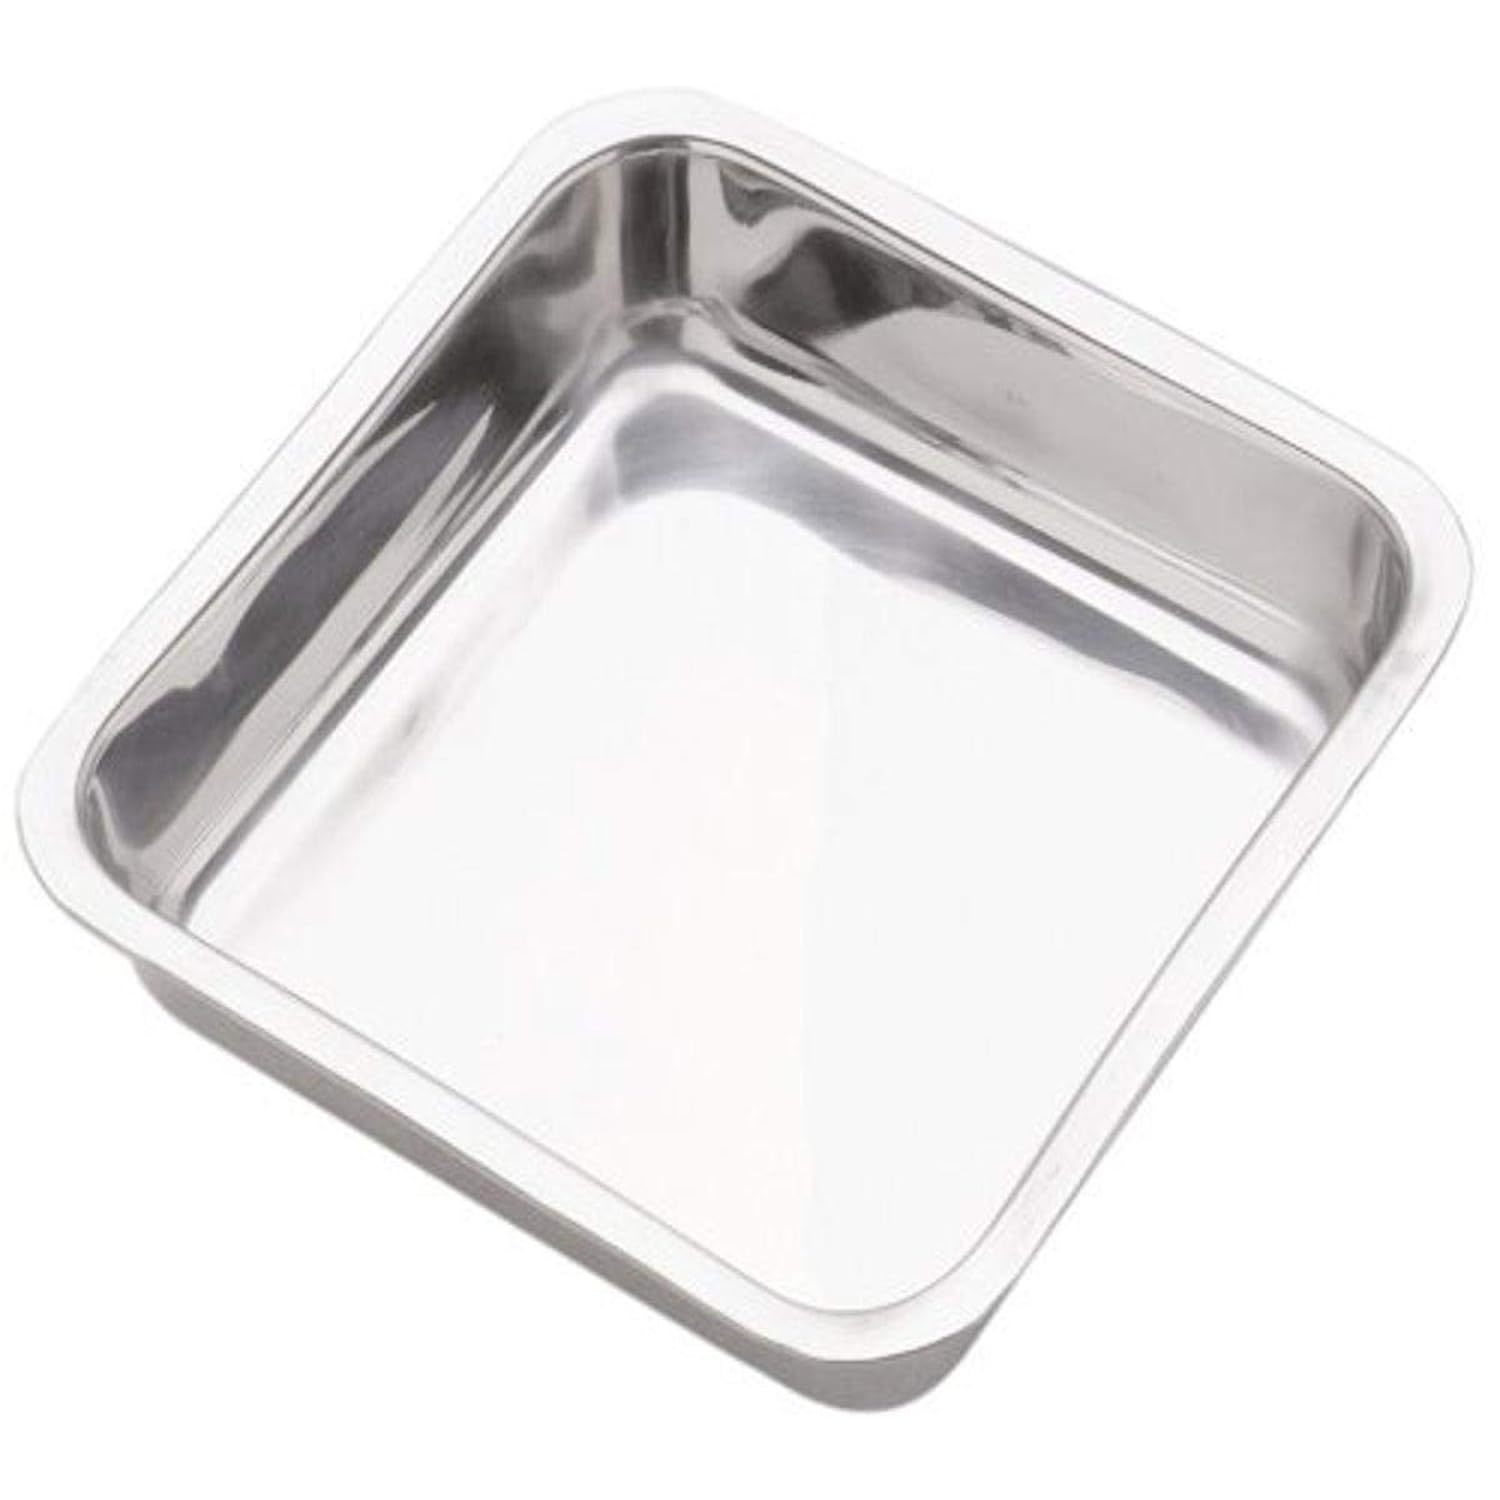 Primary image for Norpro 8 Inch Stainless Steel Cake Pan, Square